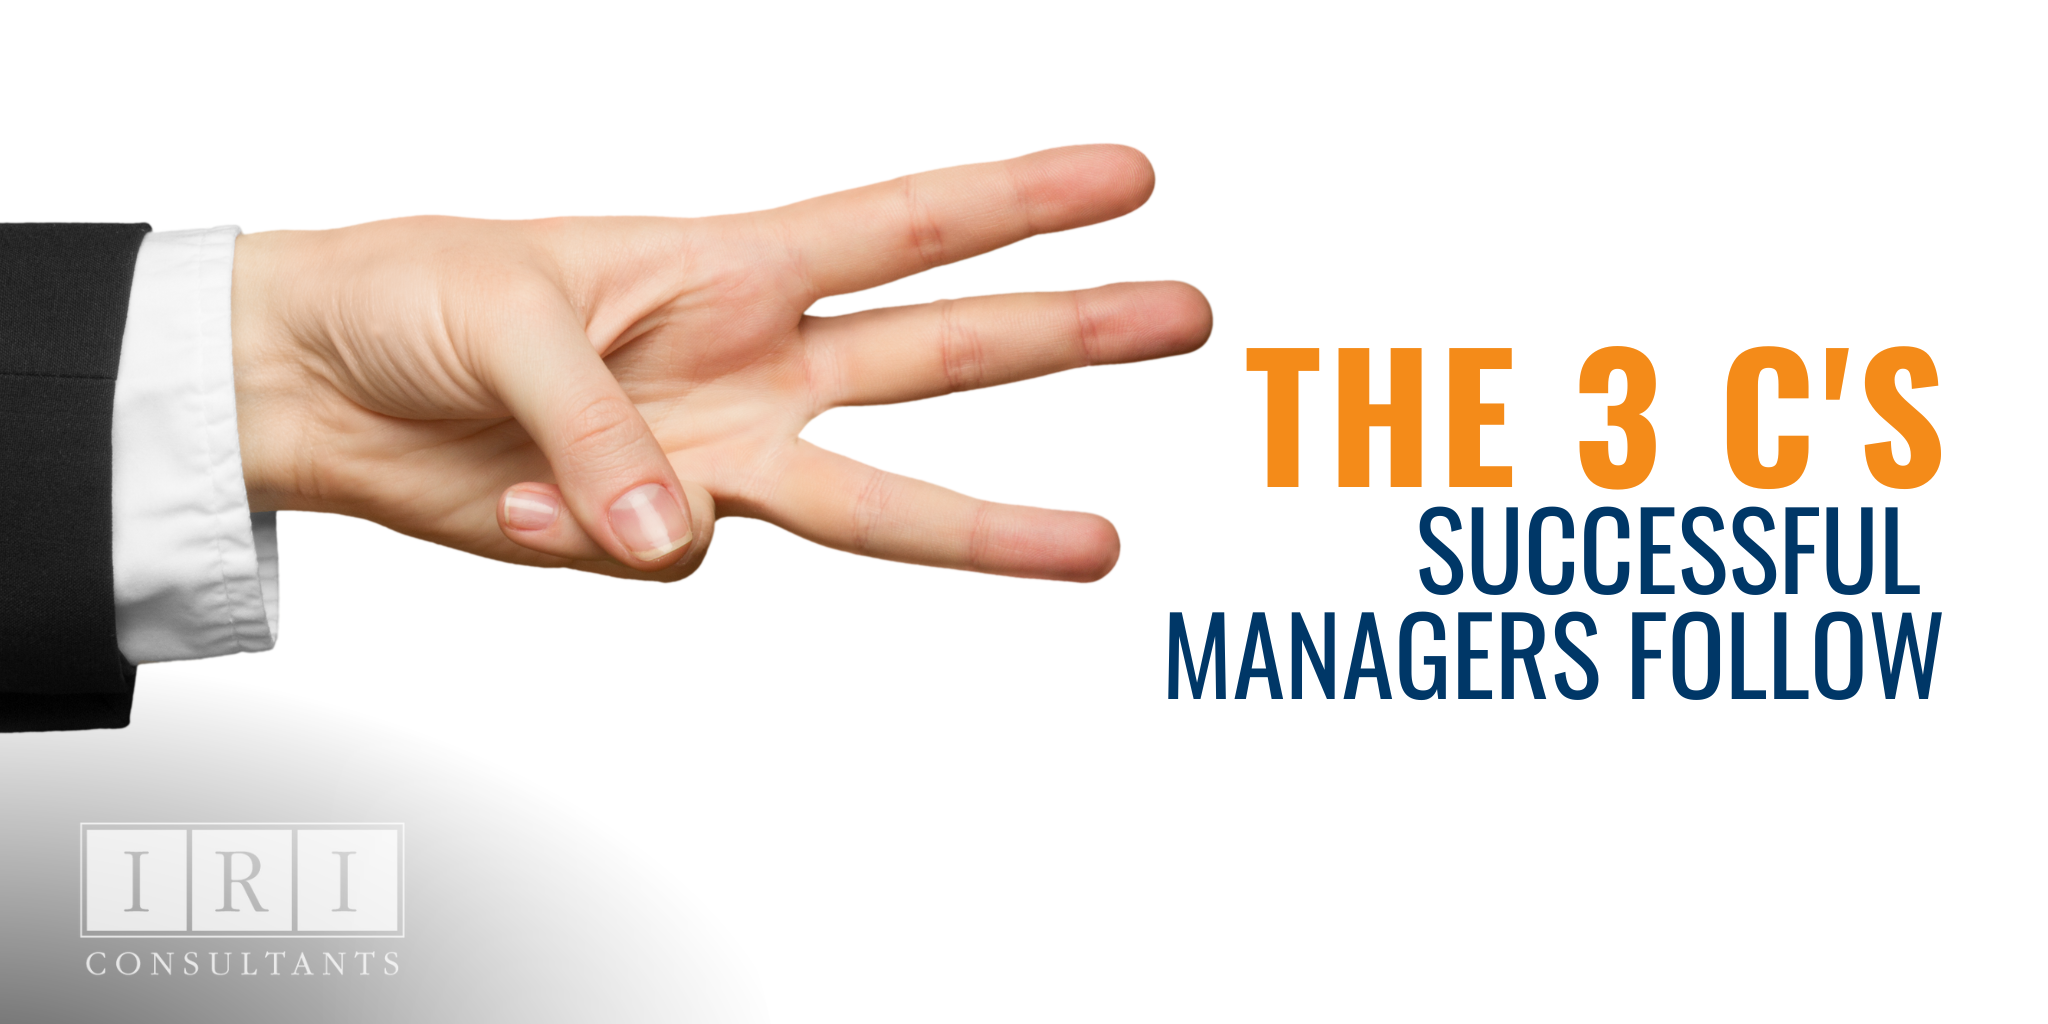 The 3 C's Successful Managers Follow